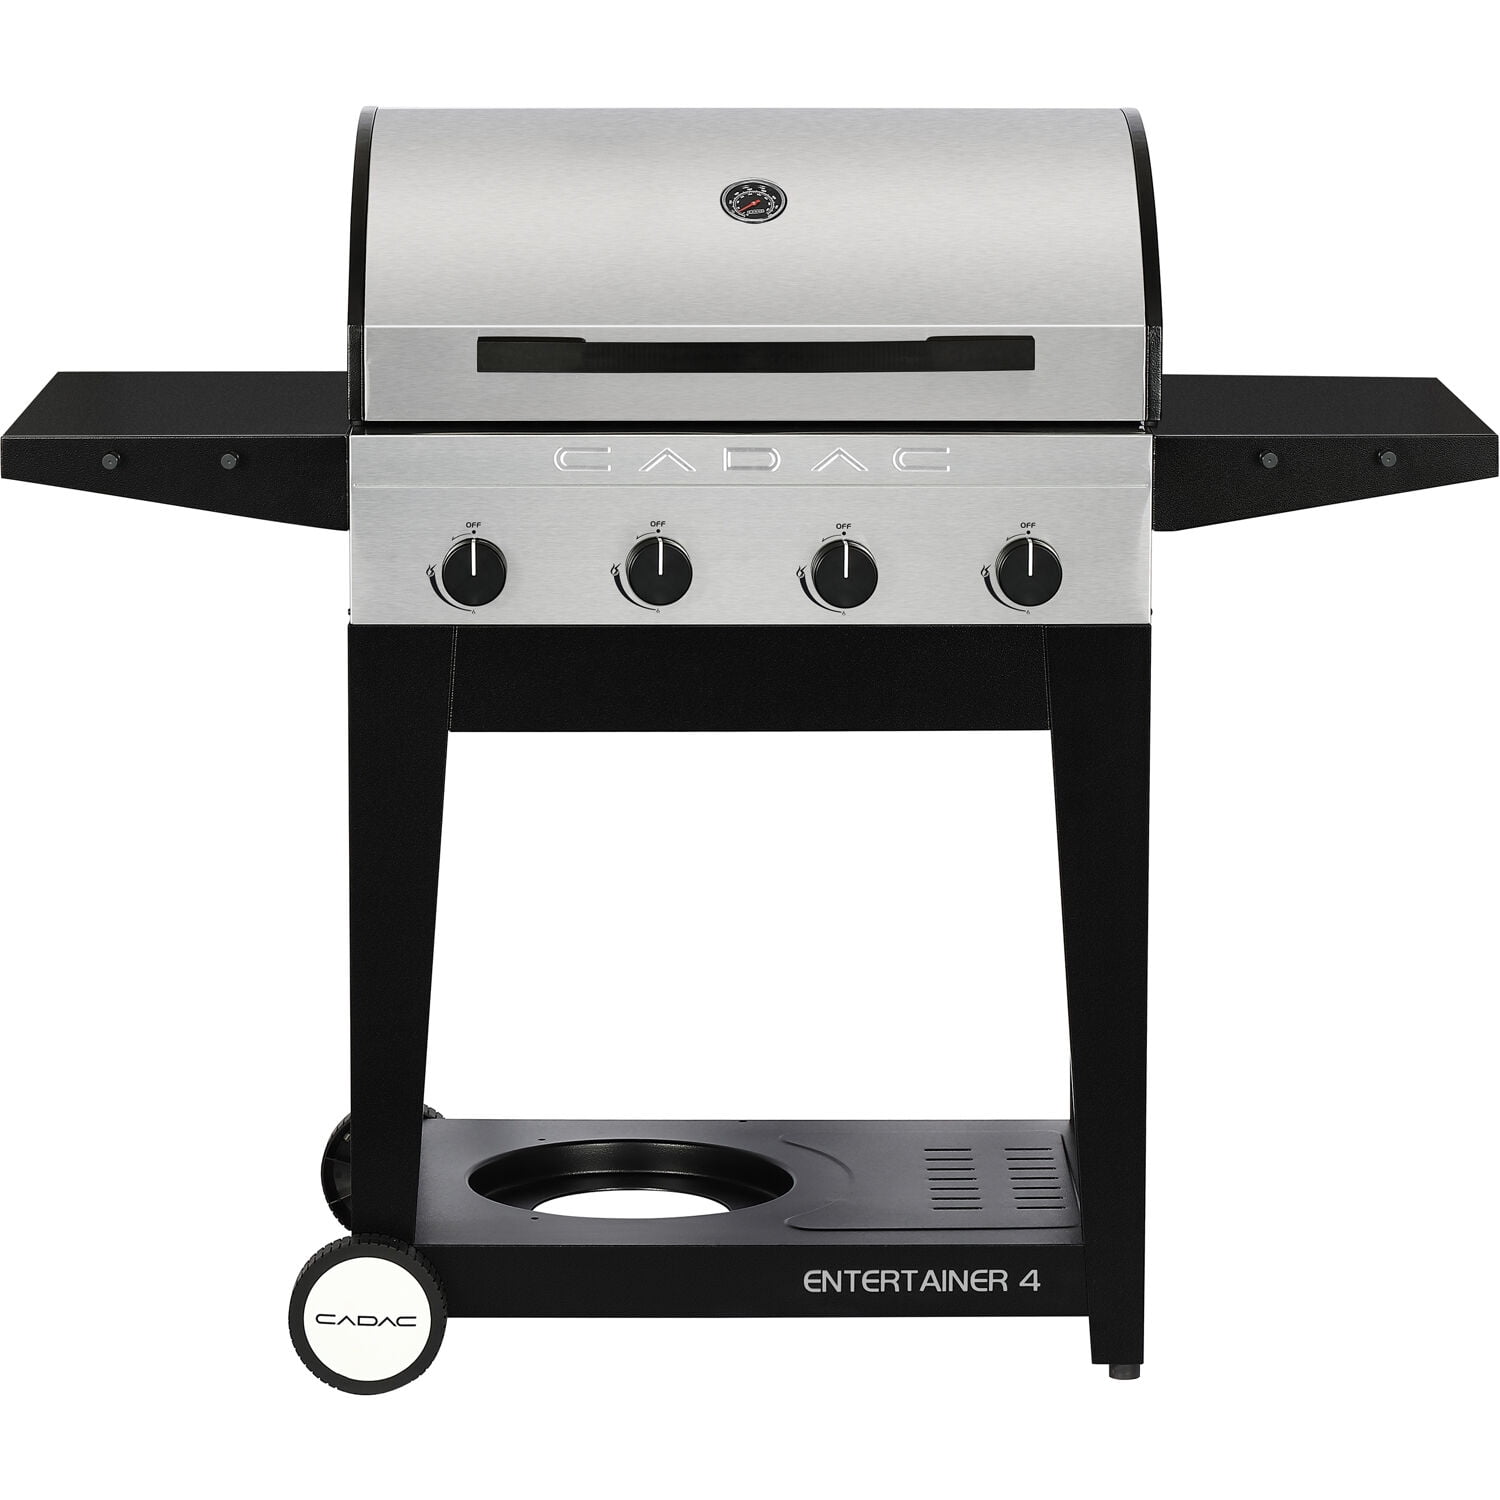 98251-41g01-us Entertainer Stainless Steel Bbq 4-burner Propane Gas Grill With Side Shelves